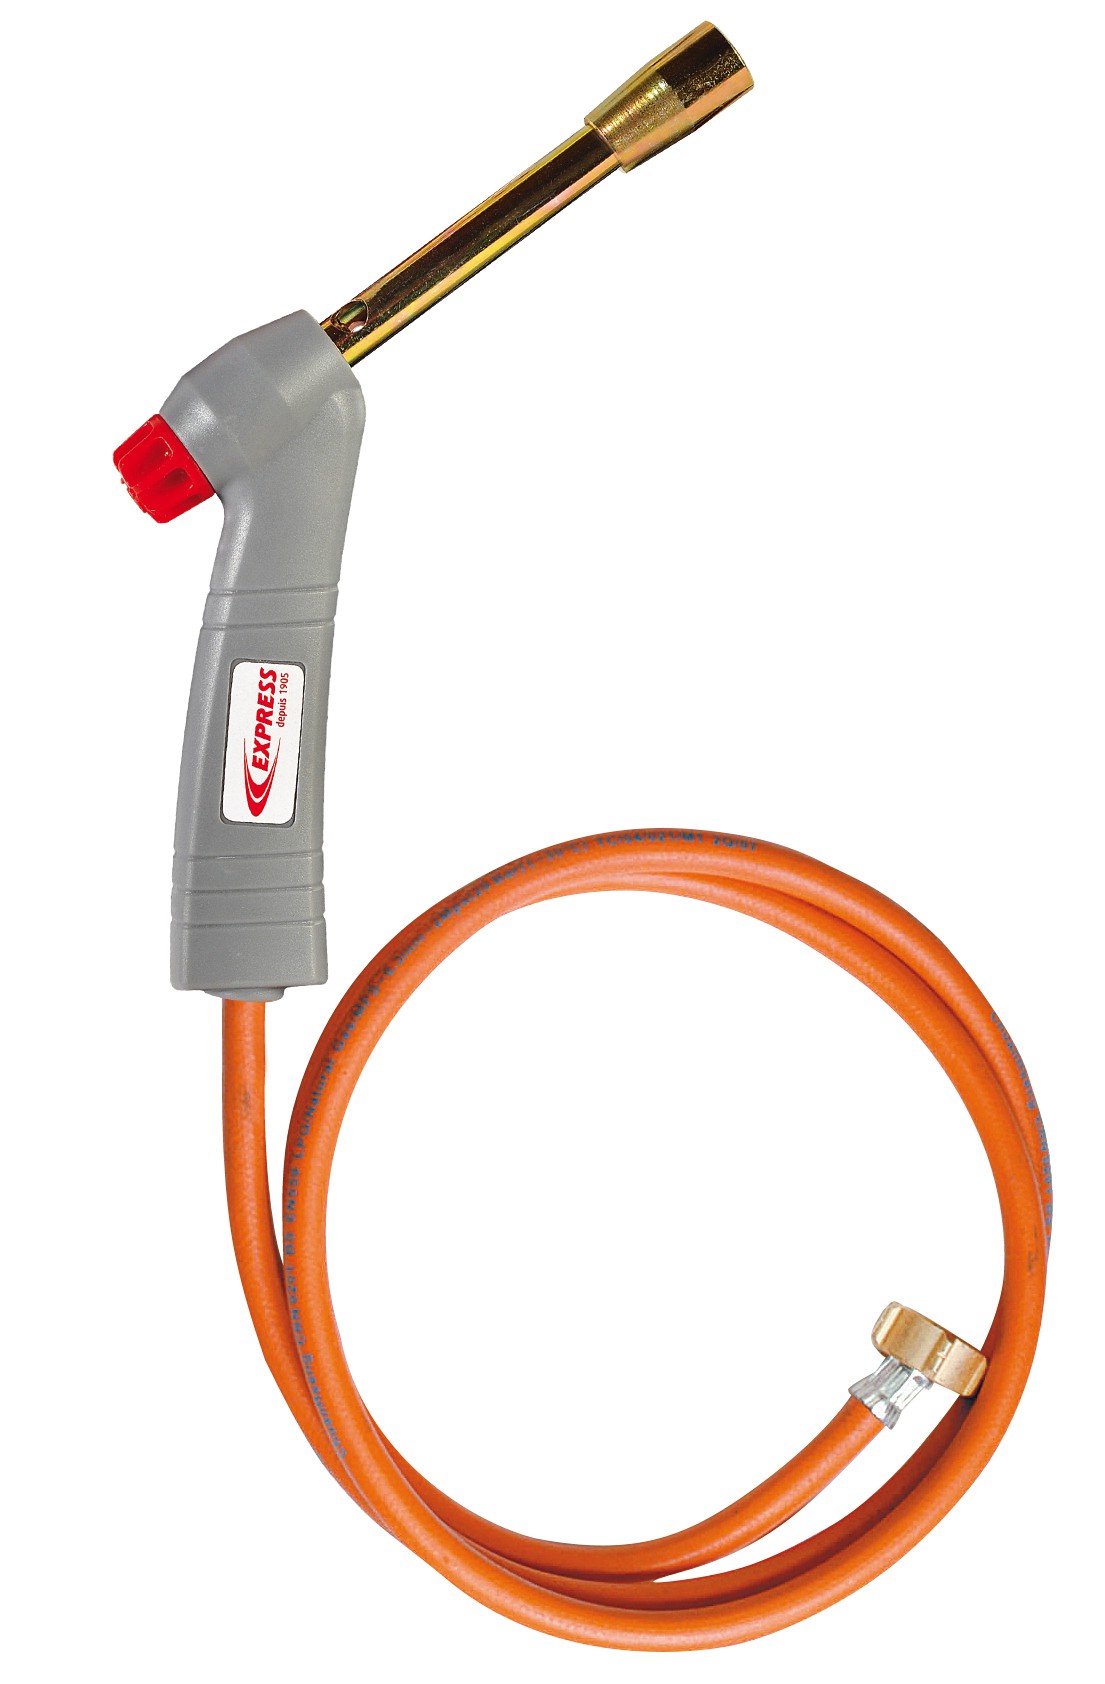 Plumber's torch pro 5100